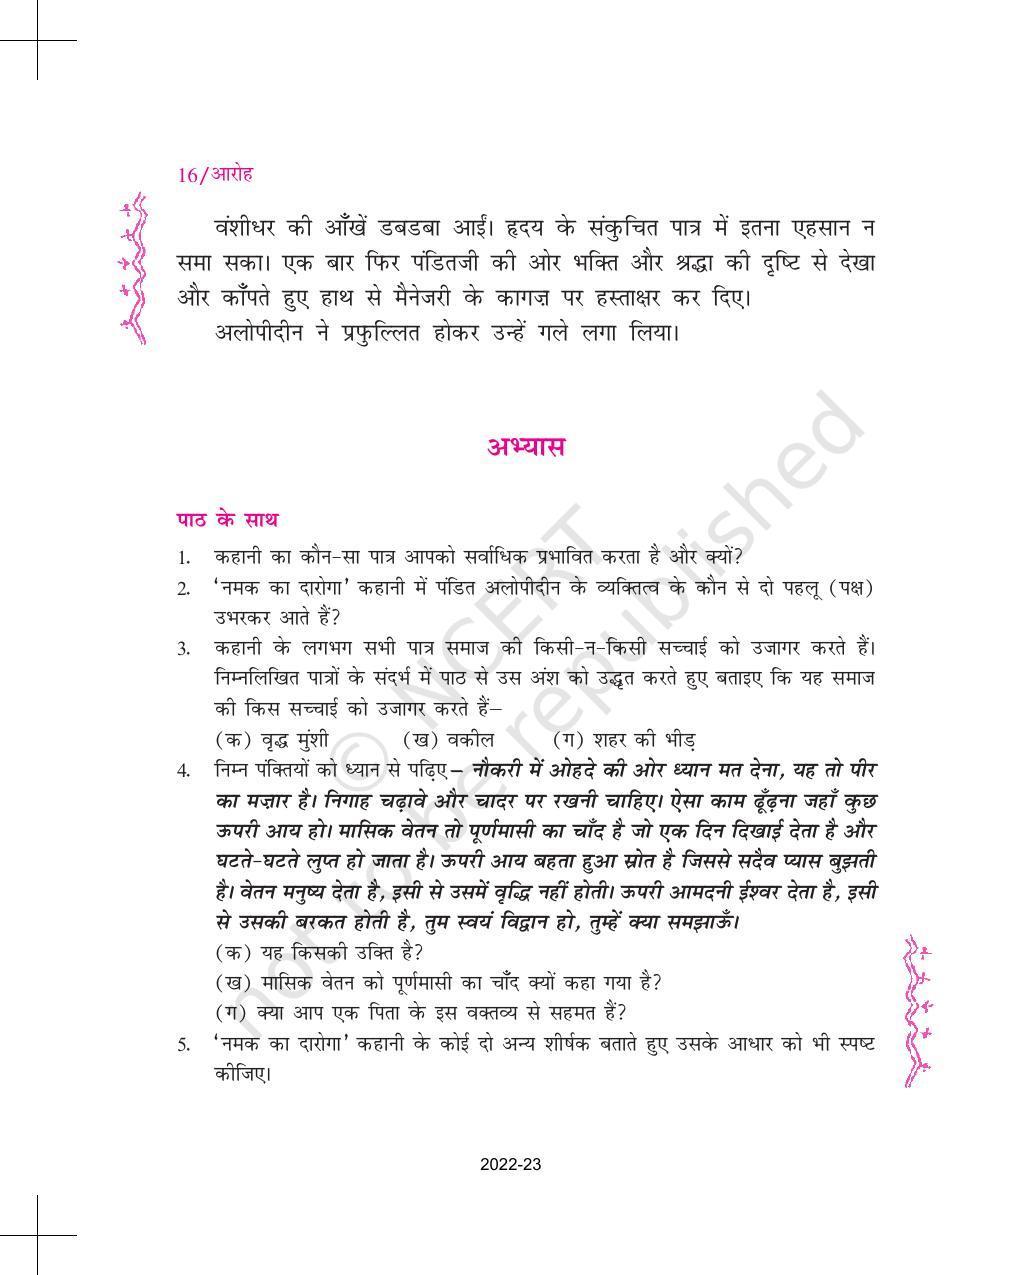 NCERT Book for Class 11 Hindi Aroh Chapter 1 नमक का दारोगा - Page 16